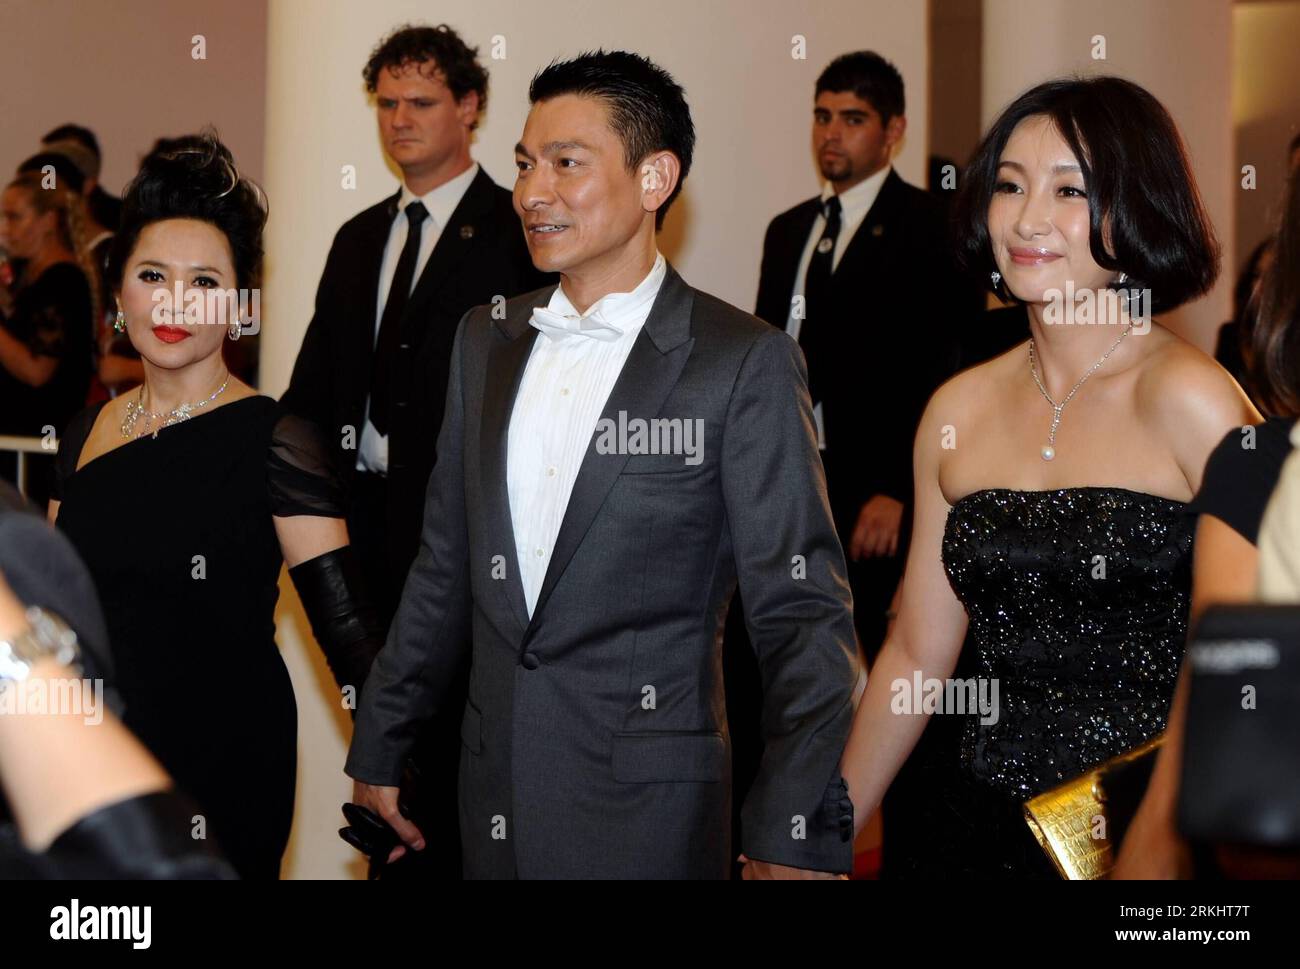 Bildnummer: 55896882  Datum: 05.09.2011  Copyright: imago/Xinhua (110906) -- VENICE, Sept. 6, 2011 (Xinhua) -- Actors Andy Lau (C), Deanie Yip (L) and Qin Hailu arrive for the premiere of the Chinese Hong Kong film Taojie (A Simple Life) at the 68th Venice International Film Festival in Venice, Italy, Sept. 5, 2011. (Xinhua/Wang Qingqin) (djj) ITALY-VENICE-FILM FESTIVAL-TAOJIE-PREMIERE PUBLICATIONxNOTxINxCHN People Film Kultur 68 Filmfestival Venedig Entertainment Filmpremiere x0x xtm premiumd 2011 quer      55896882 Date 05 09 2011 Copyright Imago XINHUA  Venice Sept 6 2011 XINHUA Actors Andy Stock Photo